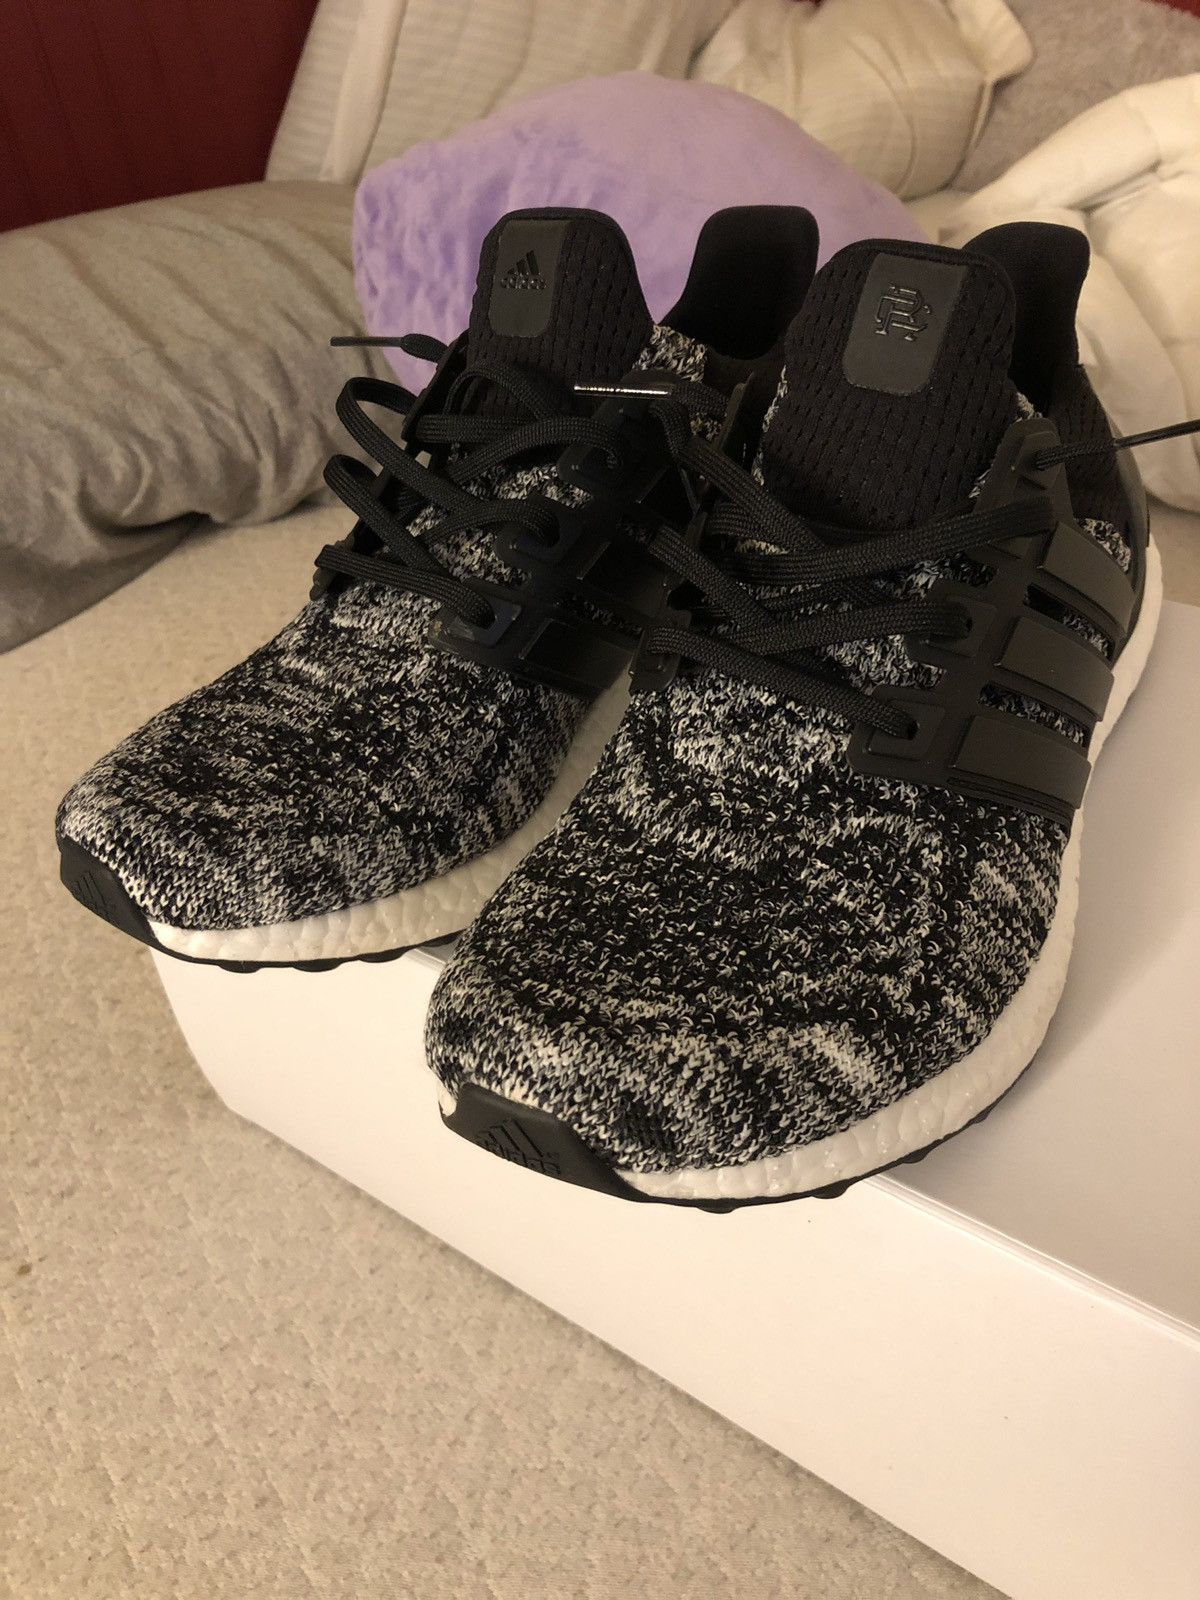 Adidas UltraBoost 1.0 Reigning Champ | Grailed